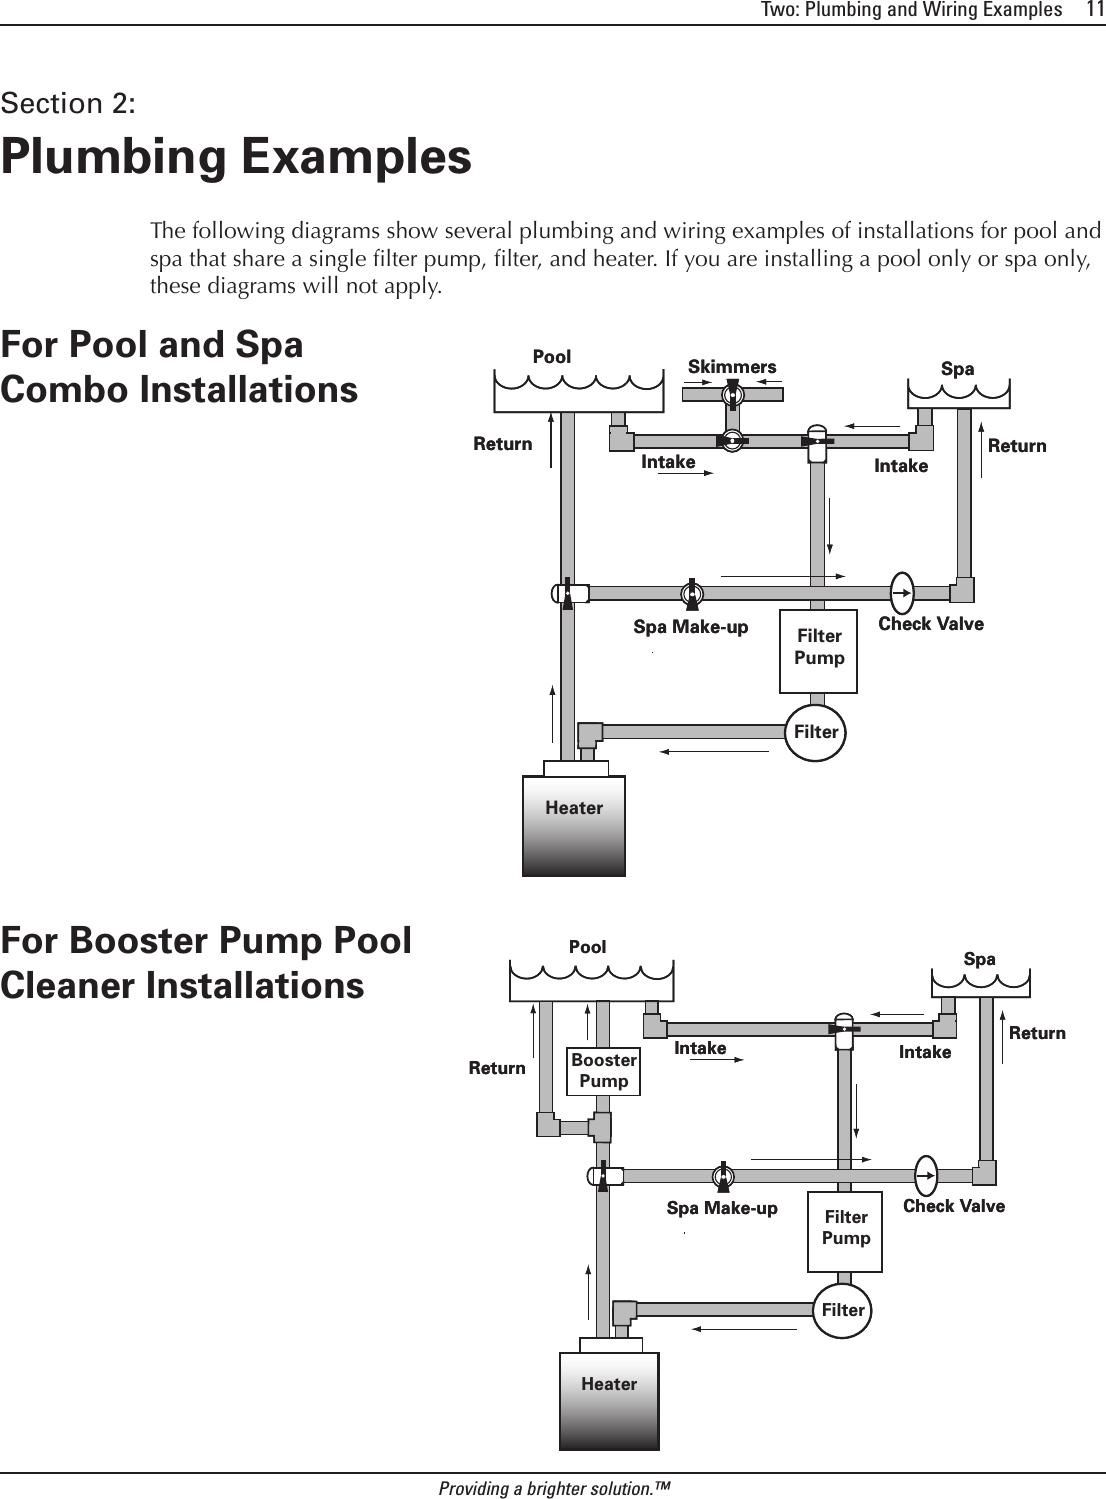 Two: Plumbing and Wiring Examples     11Providing a brighter solution.™Section 2:  Plumbing ExamplesThe following diagrams show several plumbing and wiring examples of installations for pool and spa that share a single lter pump, lter, and heater. If you are installing a pool only or spa only, these diagrams will not apply.For Pool and Spa Combo Installations               For Booster Pump Pool Cleaner InstallationsPool SpaFilterCheck ValveSpa Make-up FilterPumpIntakeReturn ReturnIntakeSkimmersHeaterPool SpaFilterCheck ValveSpa Make-up FilterPumpIntakeReturn ReturnIntakeSkimmersHeaterPool SpaFilterCheck ValveSpa Make-up FilterPumpIntakeReturnReturnIntakeHeaterBoosterPumpPool SpaFilterCheck ValveSpa Make-up FilterPumpIntakeReturnReturnIntakeHeaterBoosterPump